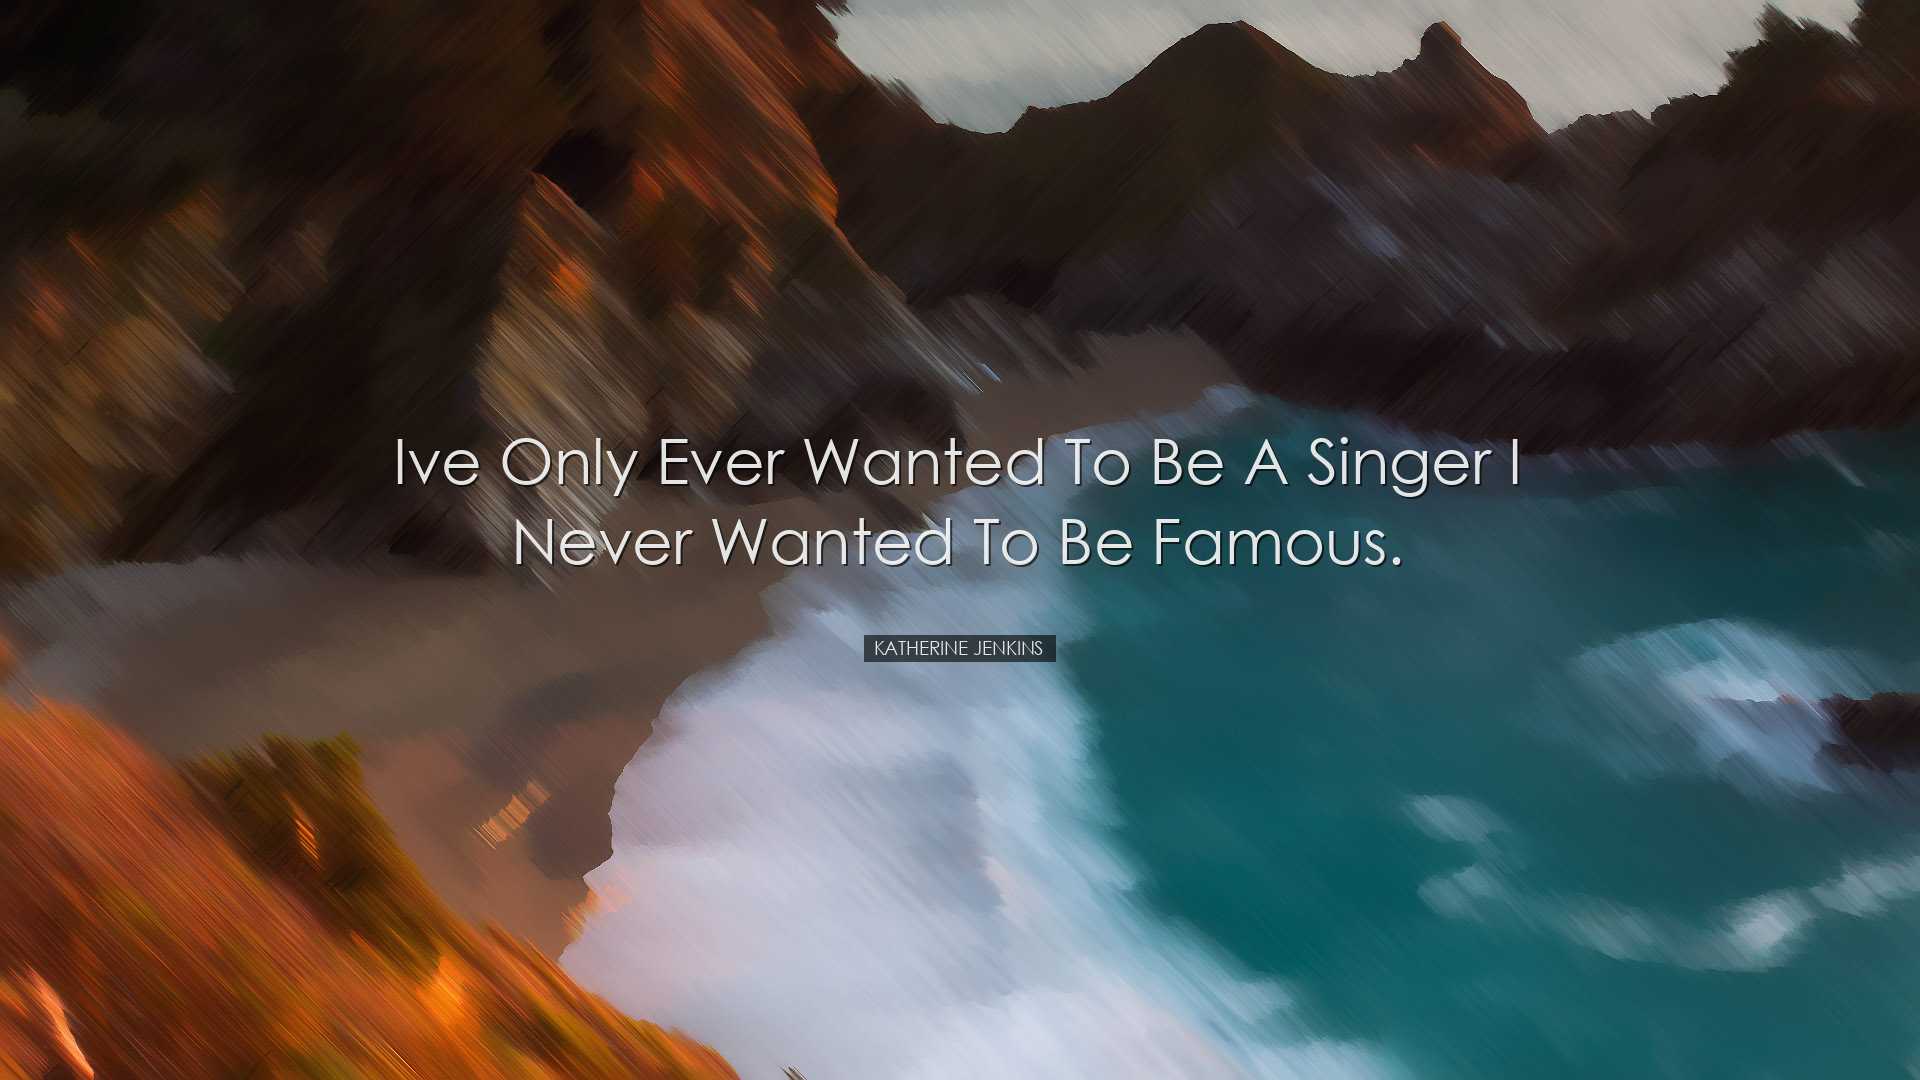 Ive only ever wanted to be a singer I never wanted to be famous. -